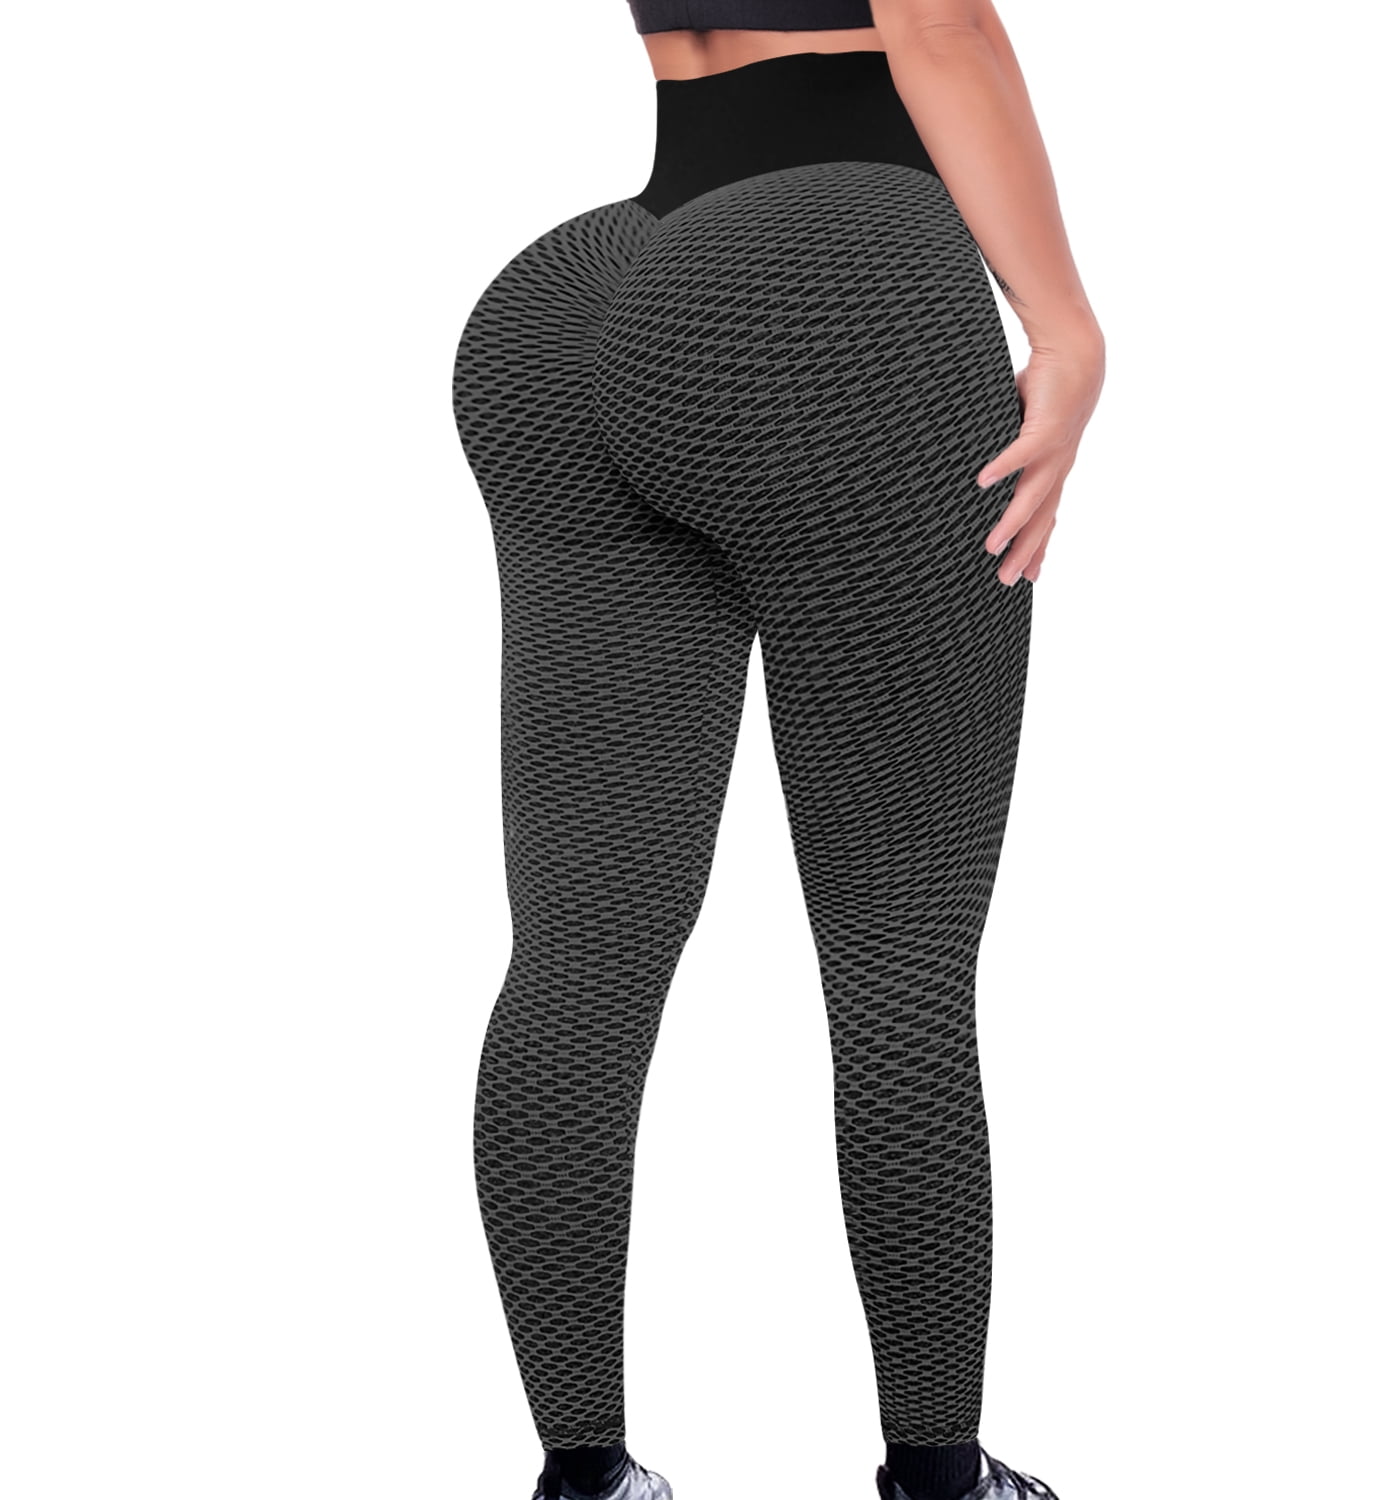 Women's High Waist Ruched Yoga Pants Tummy Control Textured Butt Lifting  Workout Leggings Stretchy Booty Scrunch Tights (Black, Large)